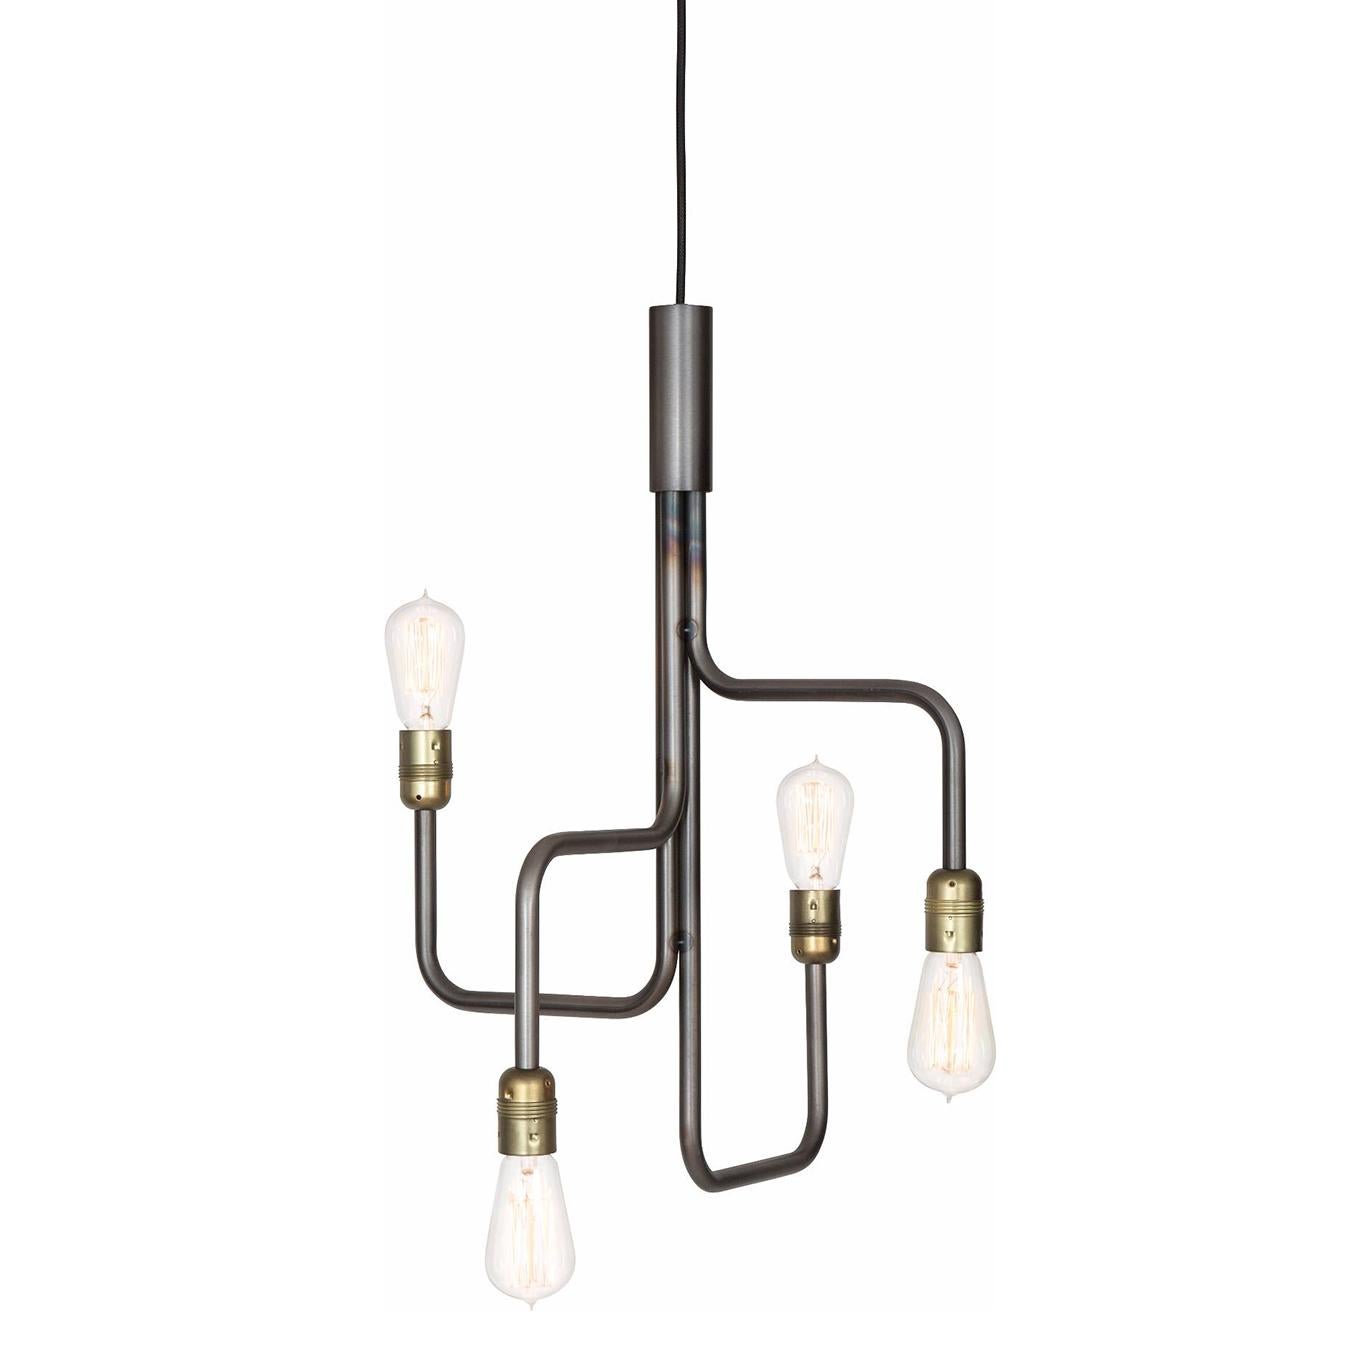 Swedish Sabina Grubbeson Strapatz Black Oxide Steel Ceiling Lamp by Konsthantverk For Sale